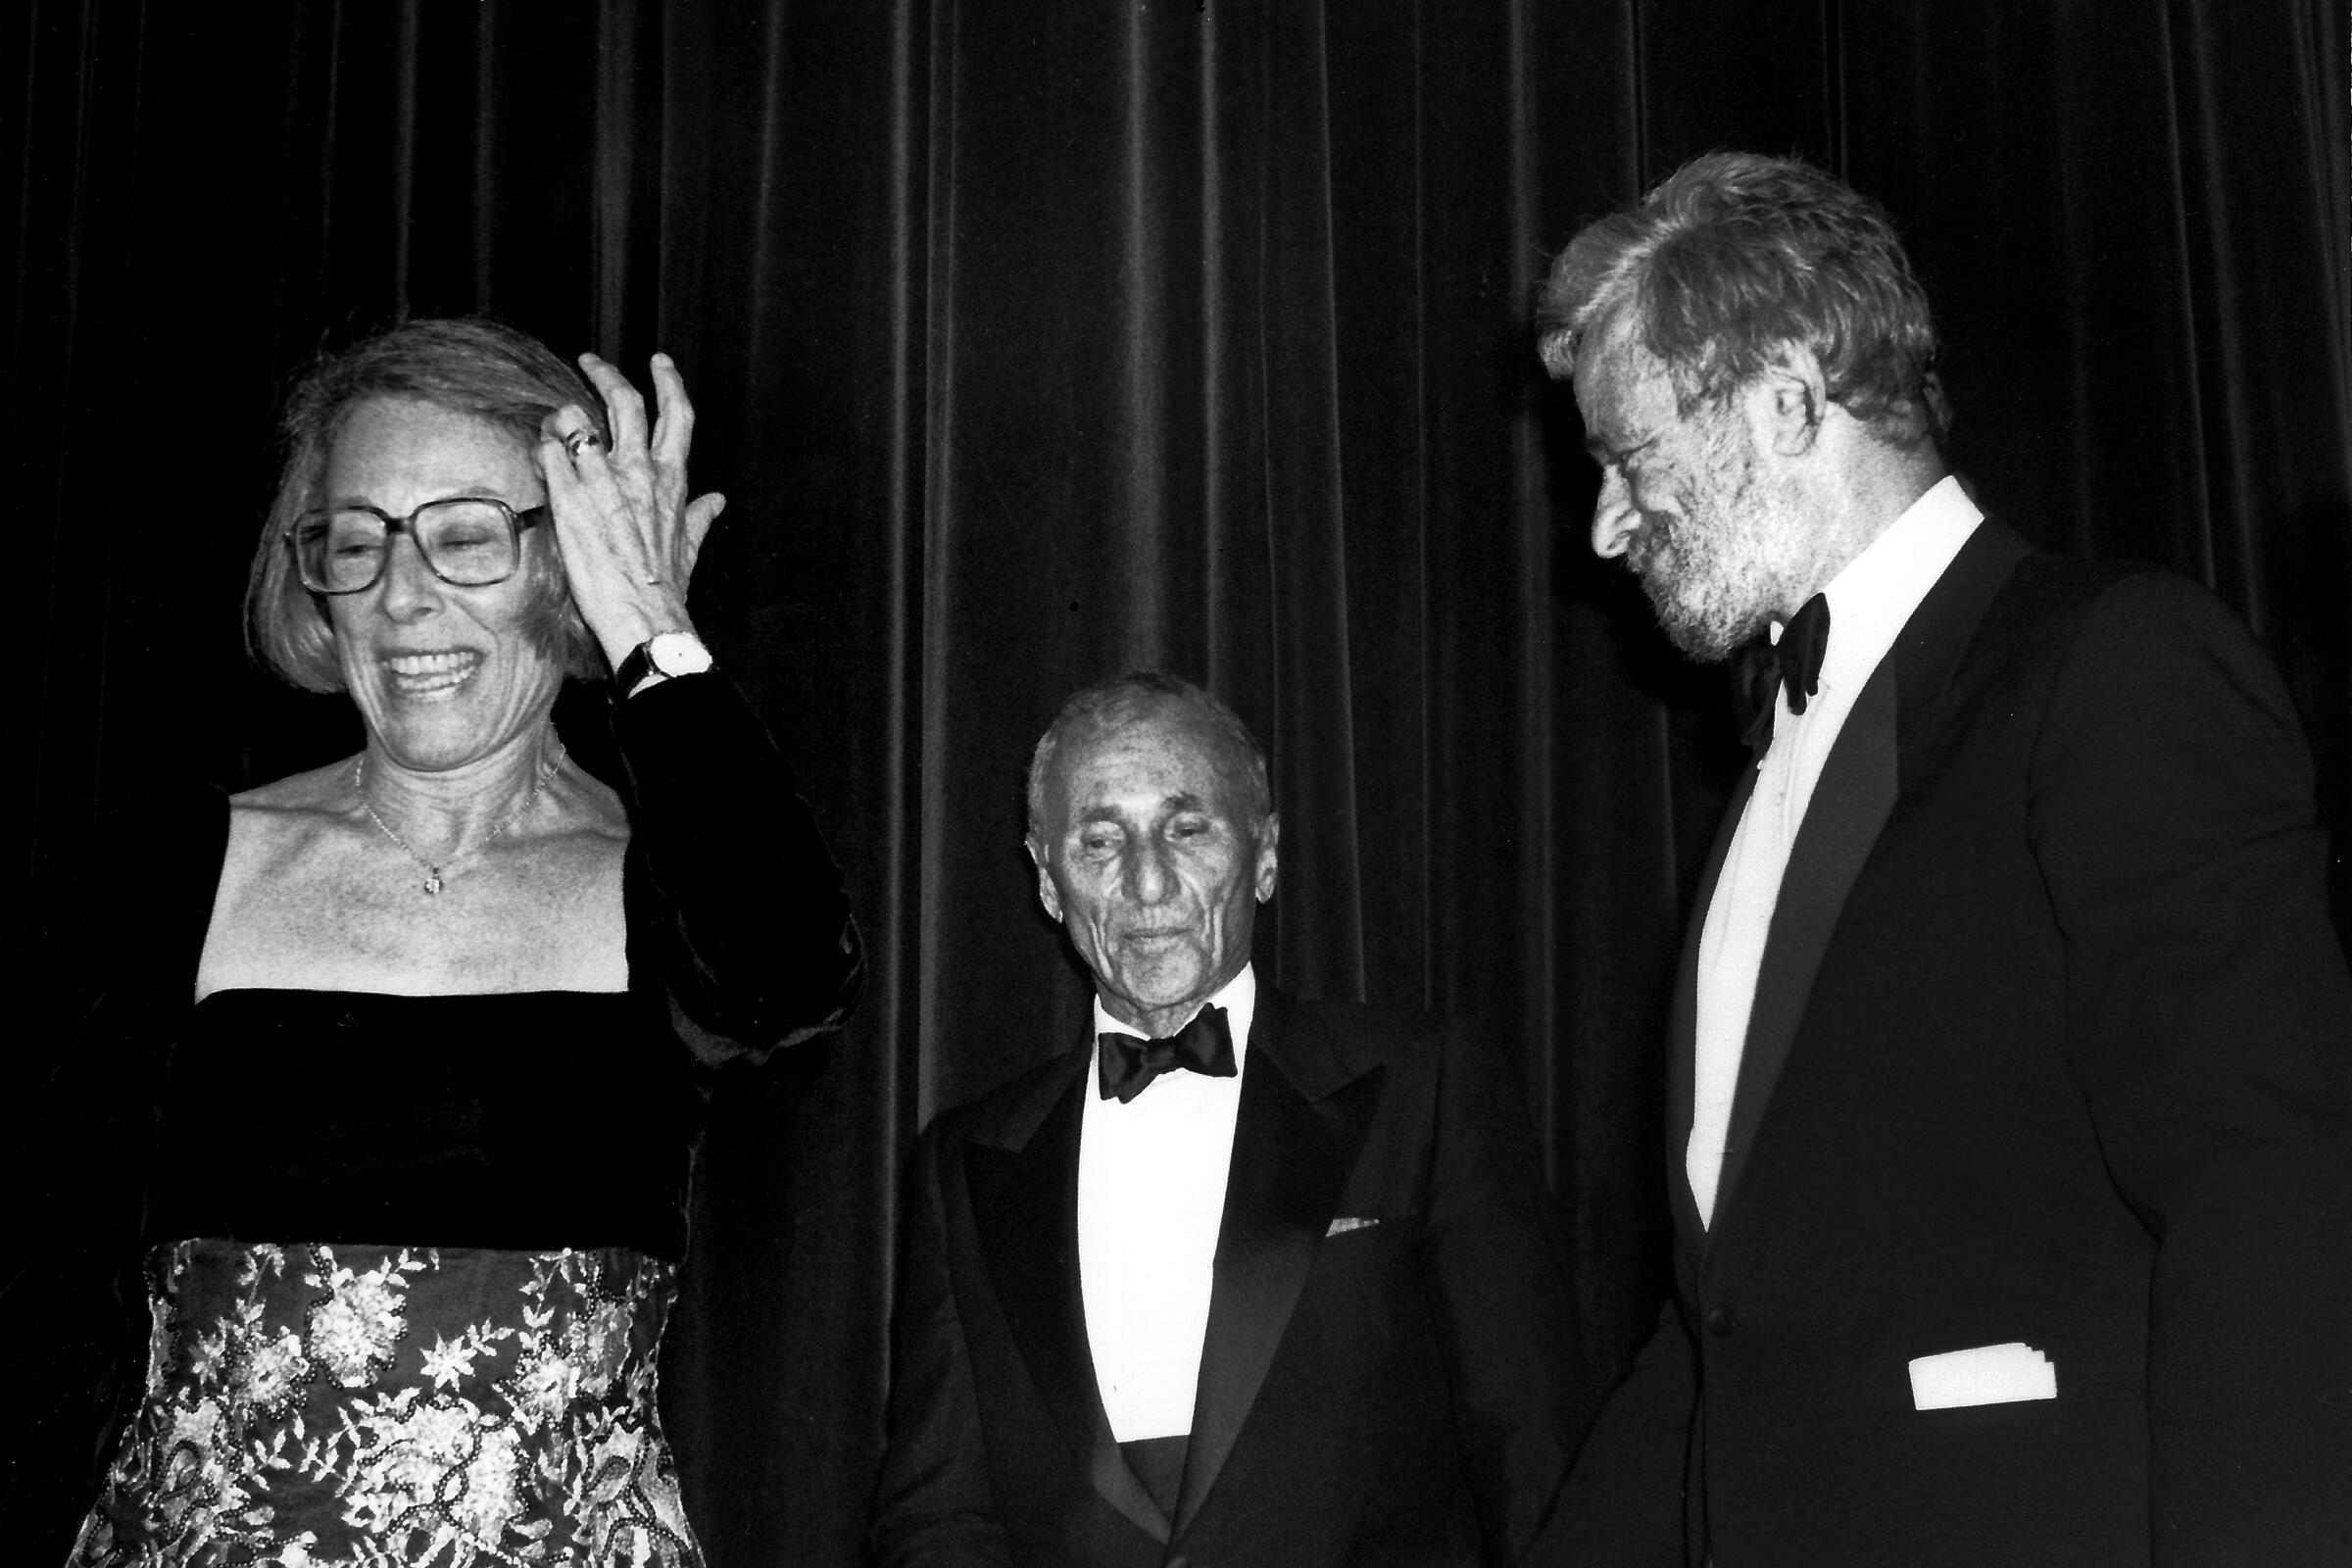 A woman adjusts her hair next to two men in tuxes.